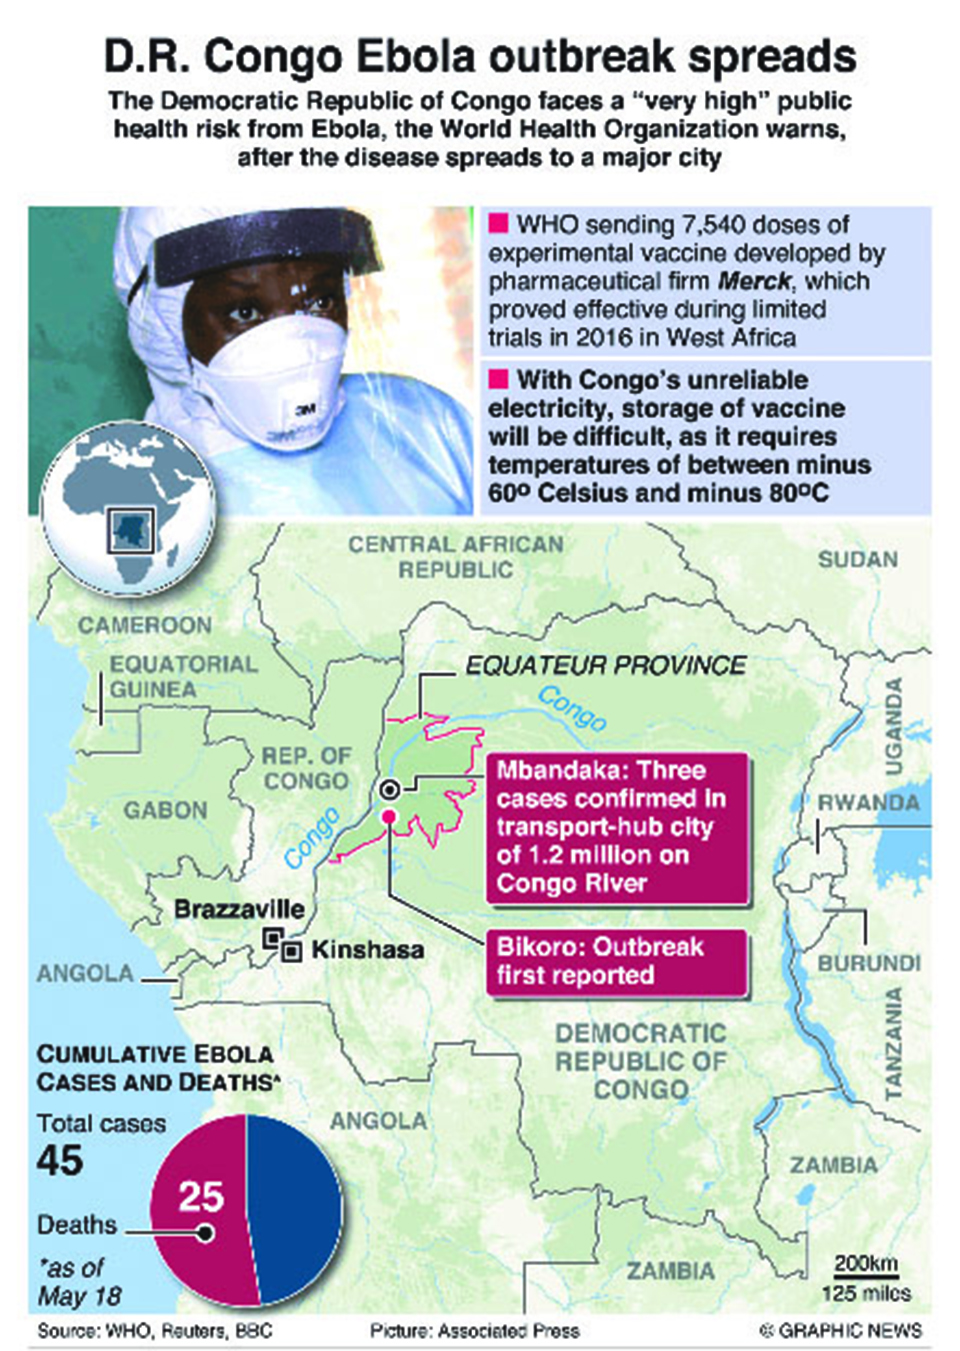 Infographics: WHO says Congo faces "very high" risk from Ebola outbreak